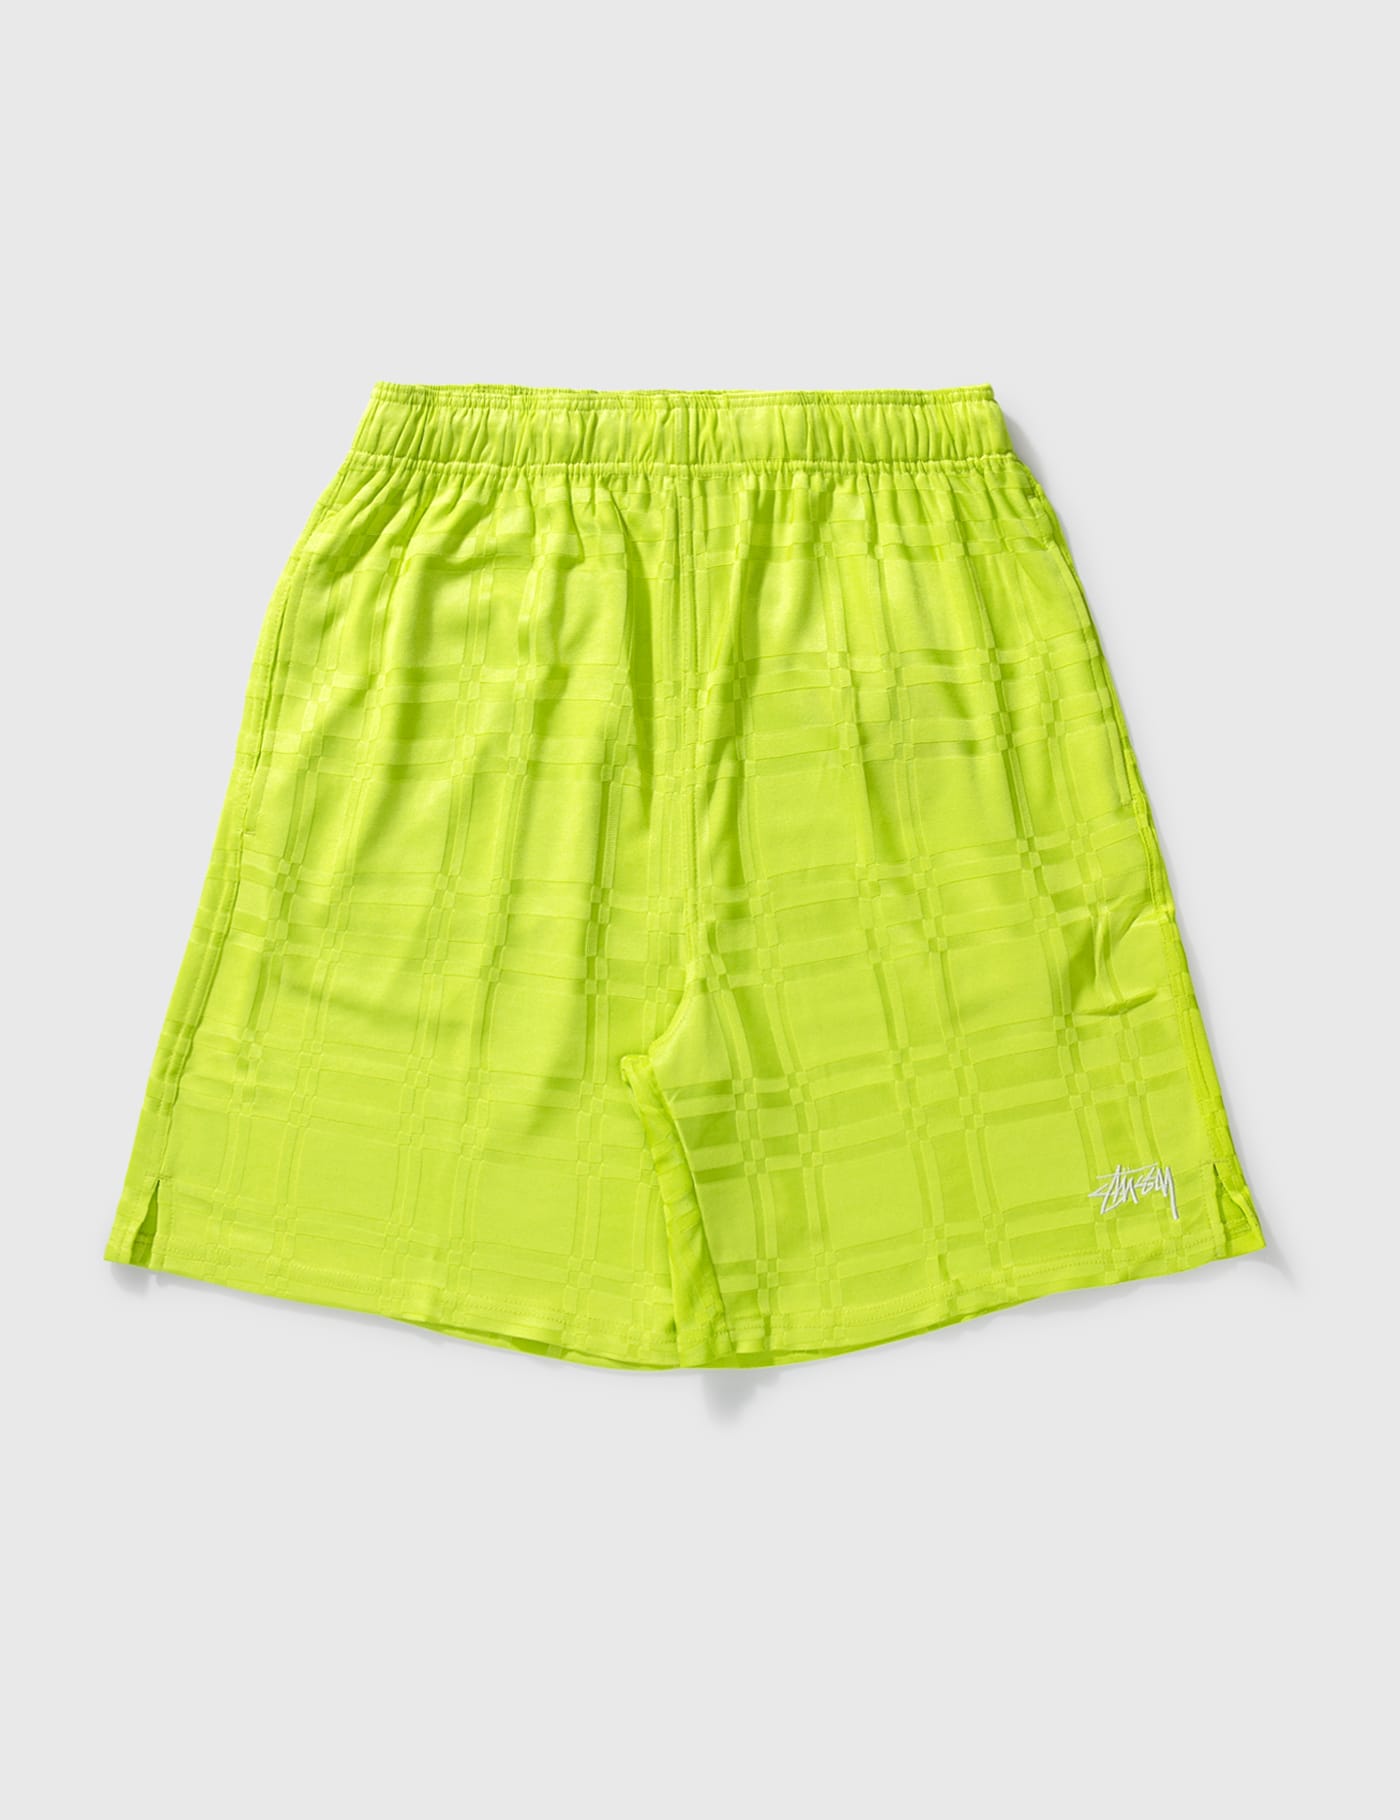 Stüssy - Plaid Soccer Short | HBX - Globally Curated Fashion and 